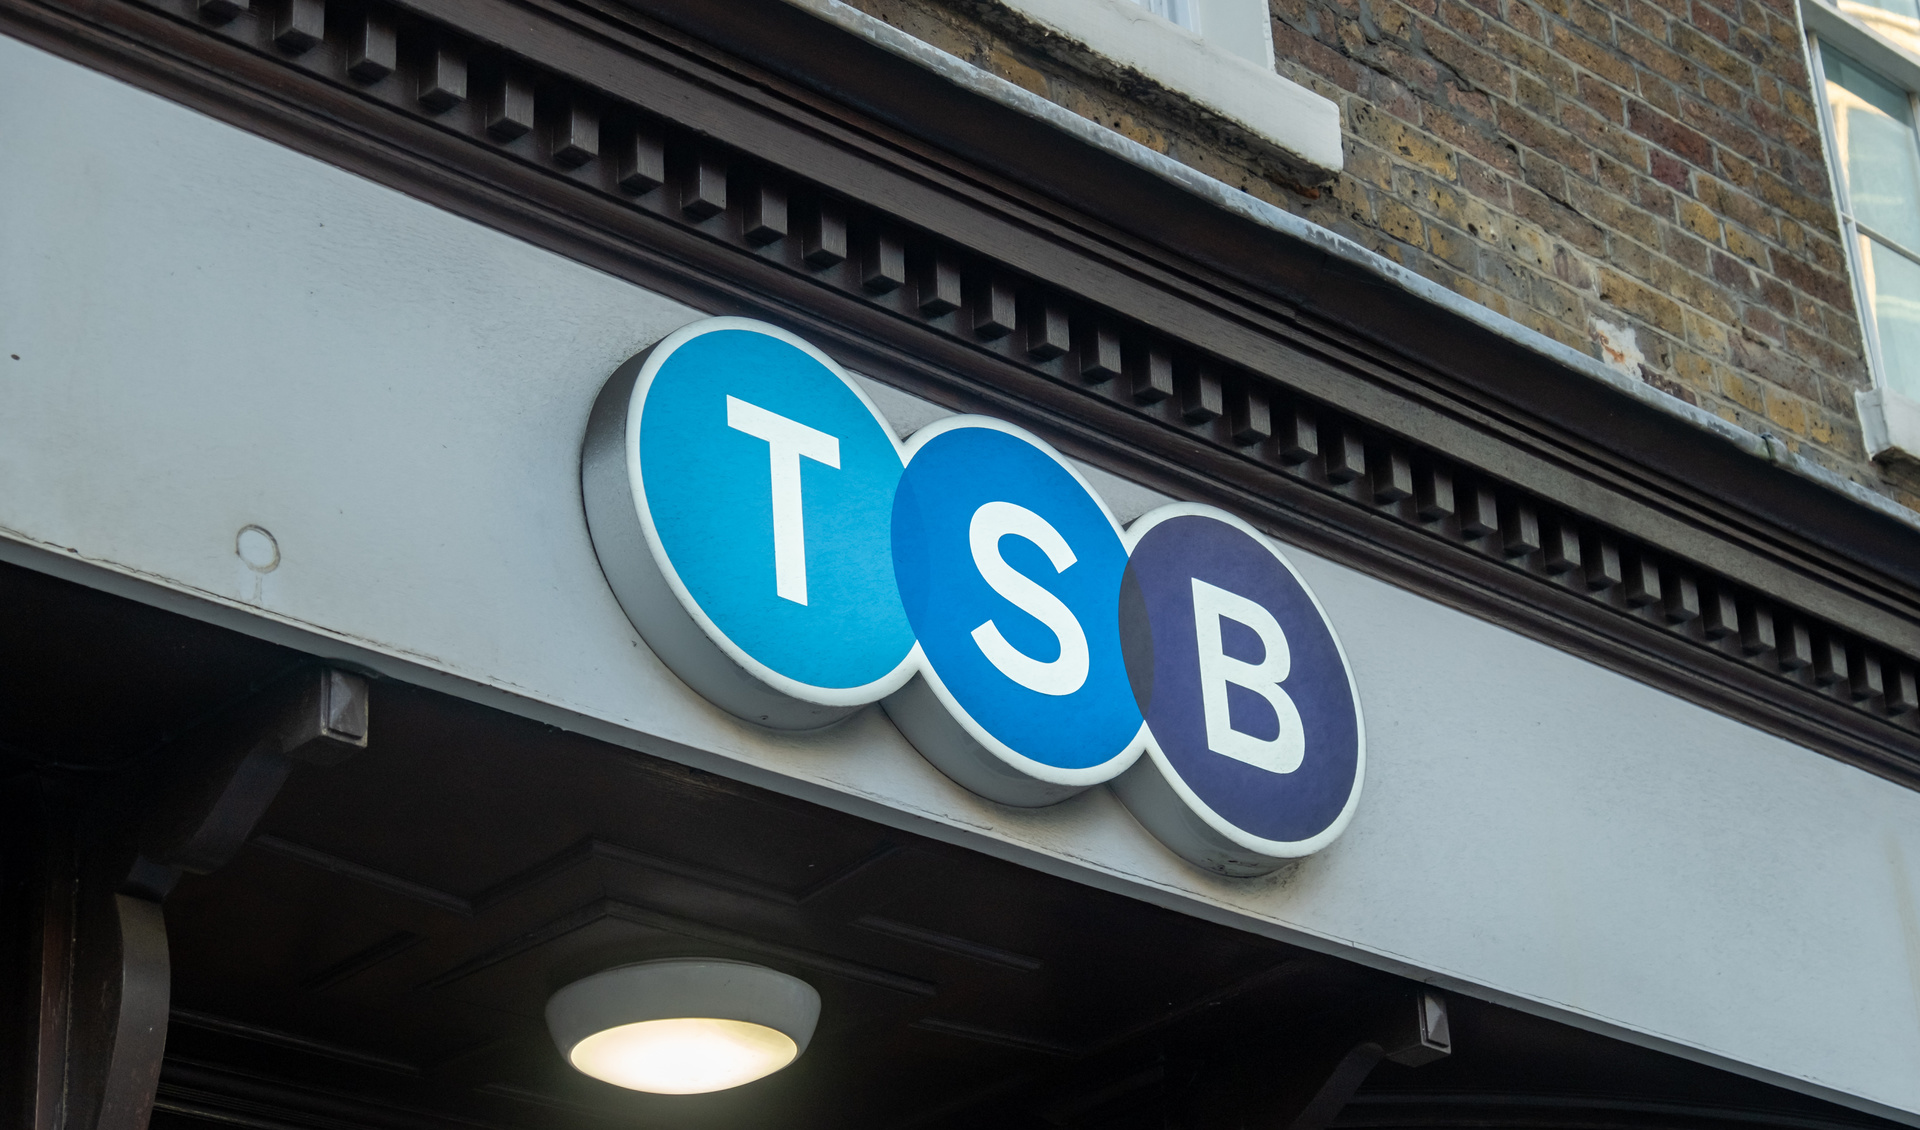 TSB's logo; our conveyancing solicitors are TSB Lender Panel Solicitors